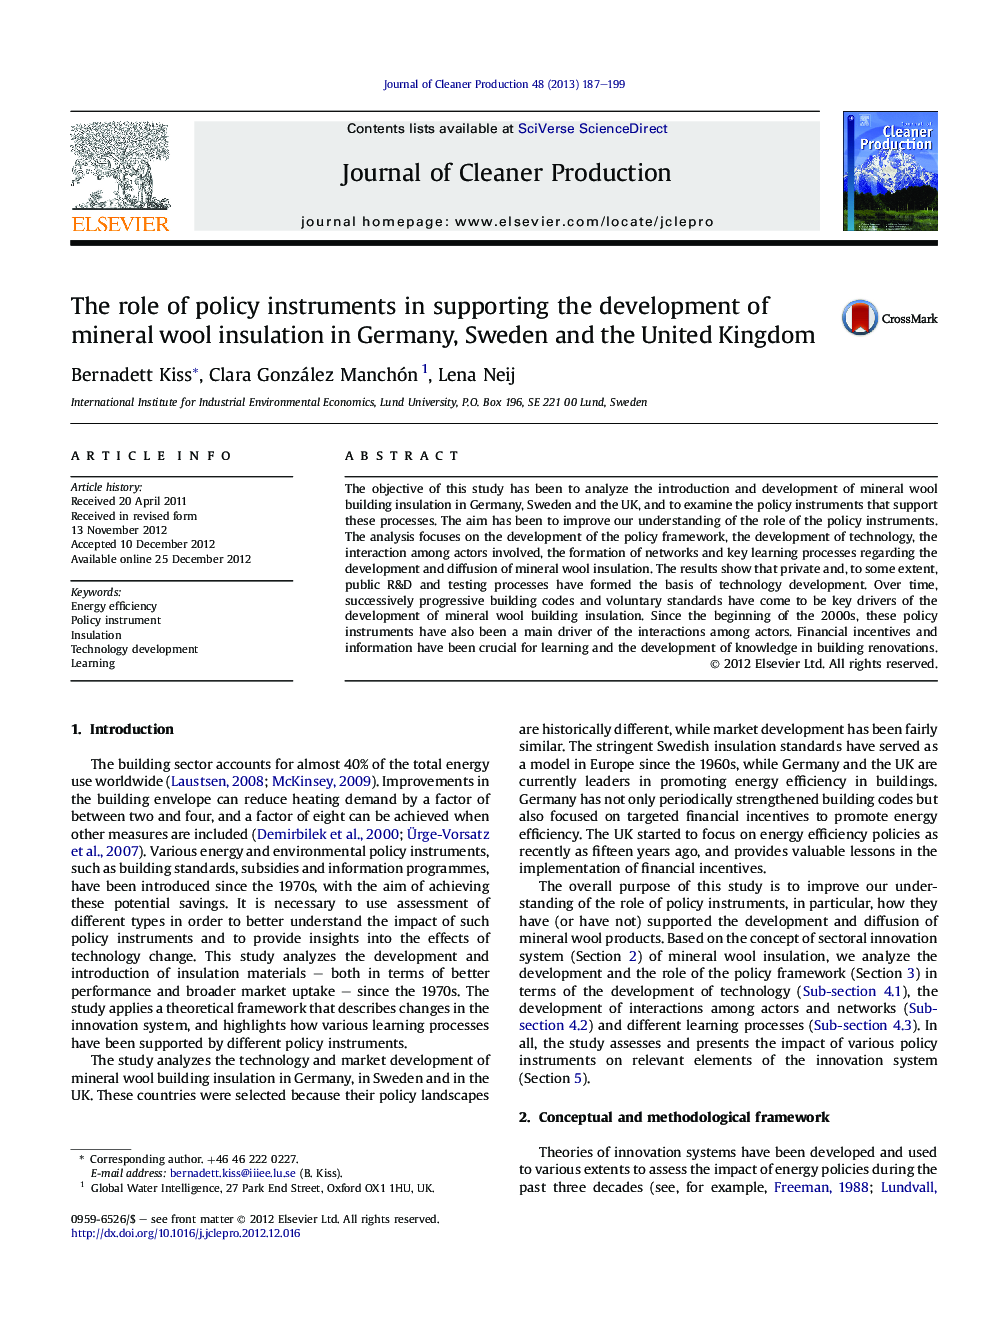 The role of policy instruments in supporting the development of mineral wool insulation in Germany, Sweden and the United Kingdom